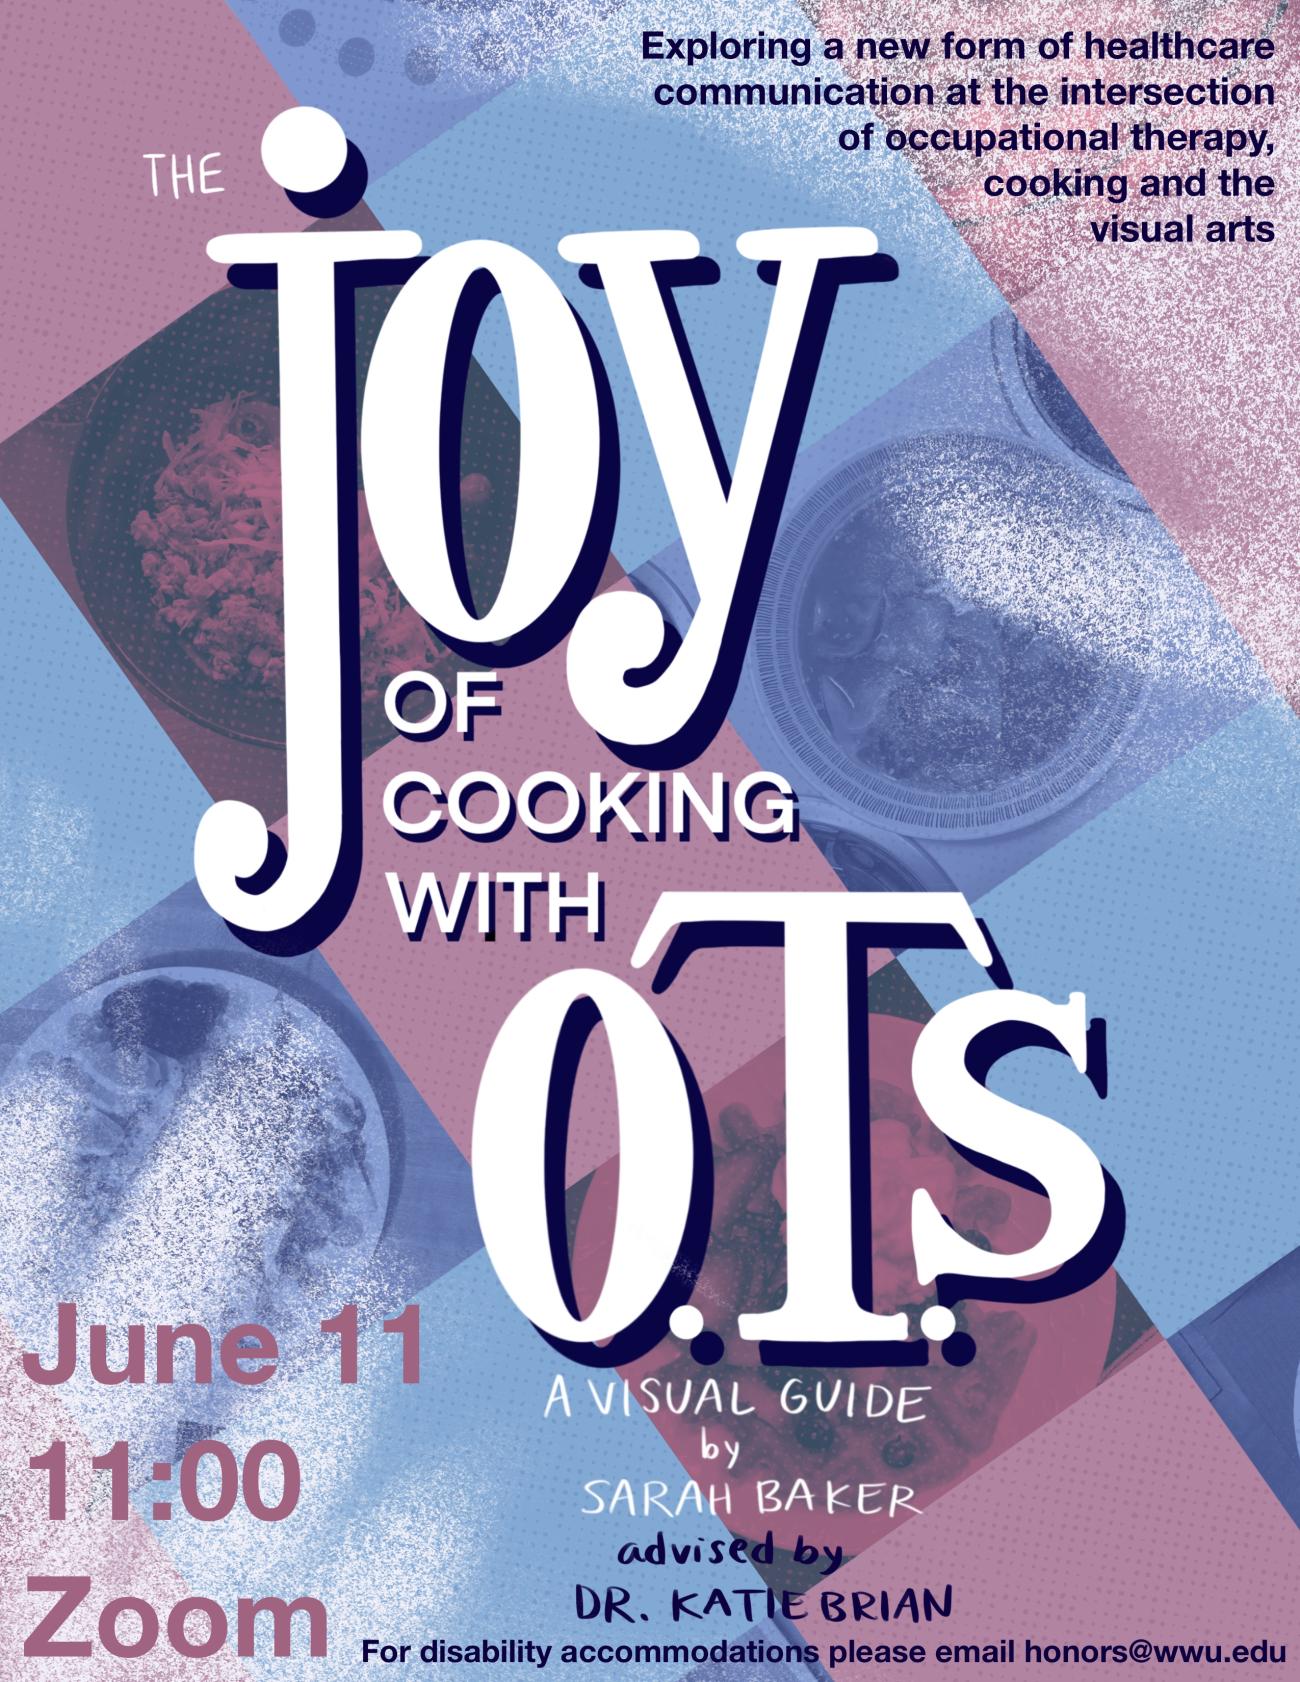 Blue and red cookbook-style background with hand-prints of flour. Text reads: "The Joy of Cooking with O.T.s: A Visual Guide, by Sarah Baker, advised by Dr. Katie Brian. Exploring a new form of healthcare communication at the intersection of occupational therapy, cooking, and the visual arts. June 11 at 11:00 on Zoom. For disability accommodations please email Honors@wwu.edu".